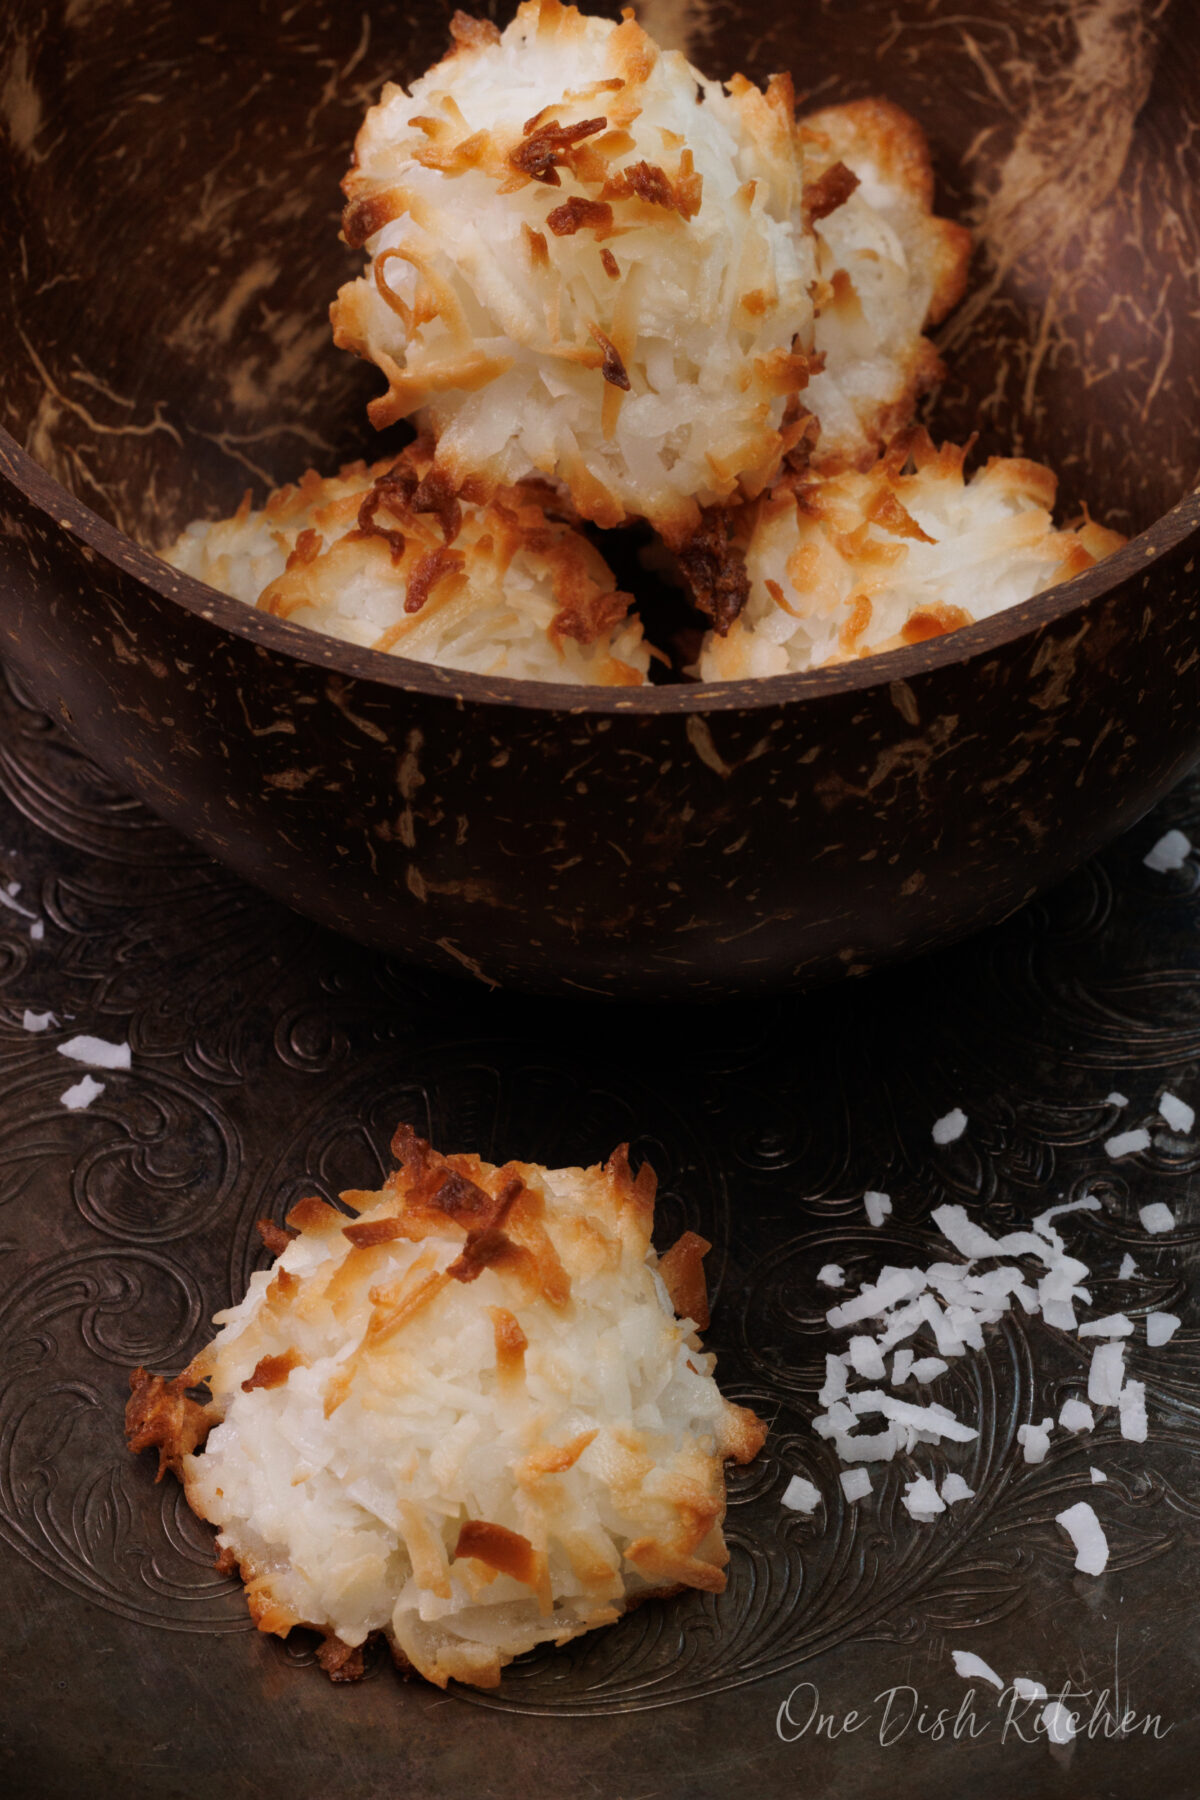 coconut macaroons on a silver try next to coconut flakes scattered around the cookie